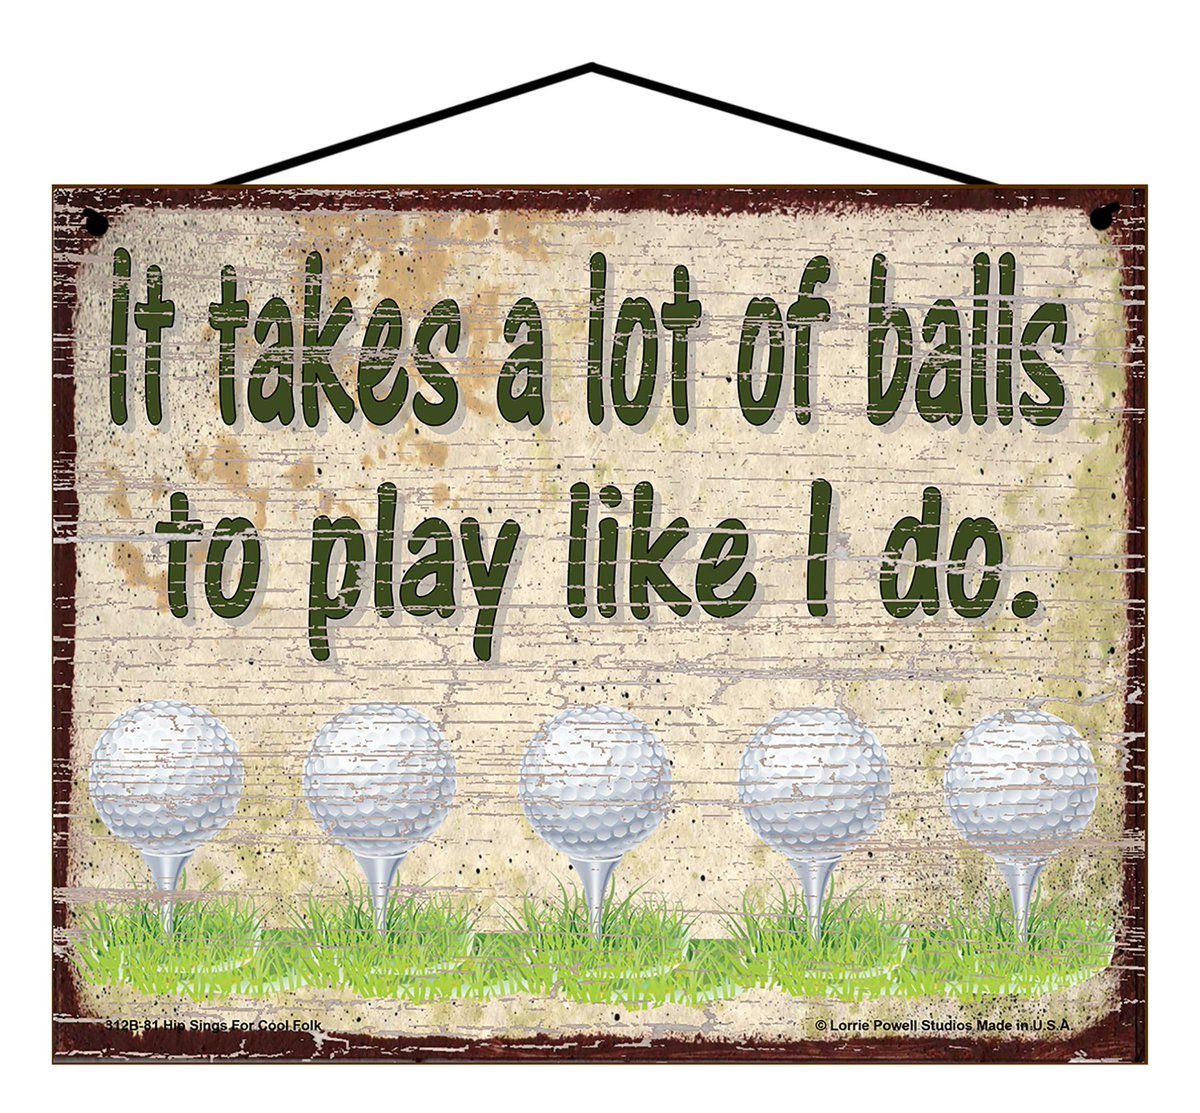 It takes a lot of balls to play like I do!

A great gift for any golfer!

Get this sign here:  buff.ly/49PqtIV 

#GolfGifts #GiftIdeas #Gifts #Golfing #Golf #GolferGifts #Golfballs #ChristmasGolf #ChristmasGifts